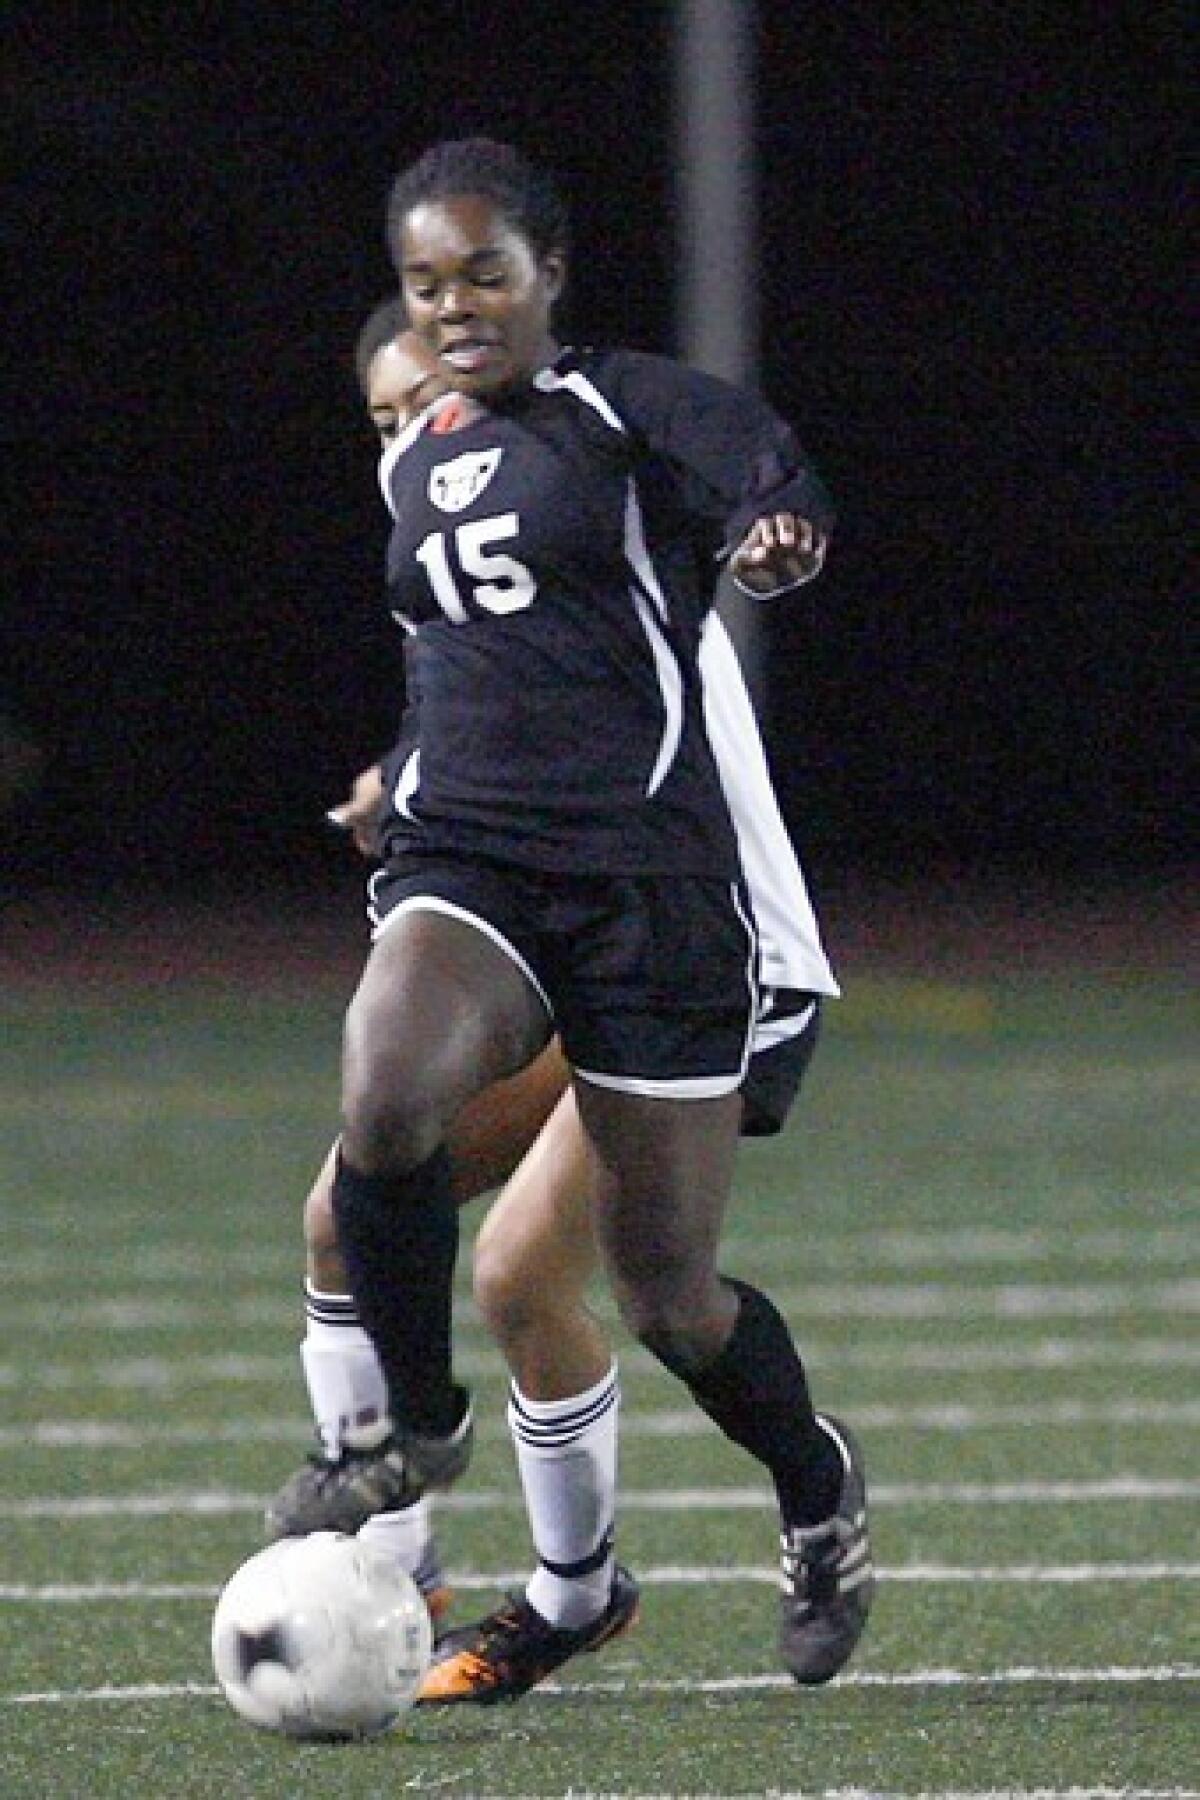 FILE PHOTO: Flintridge Sacred Heart Academy's Kayla Mills takes possession of the ball during a game against South Pasadena at South Pasadena High School on Thursday, December 13, 2012.